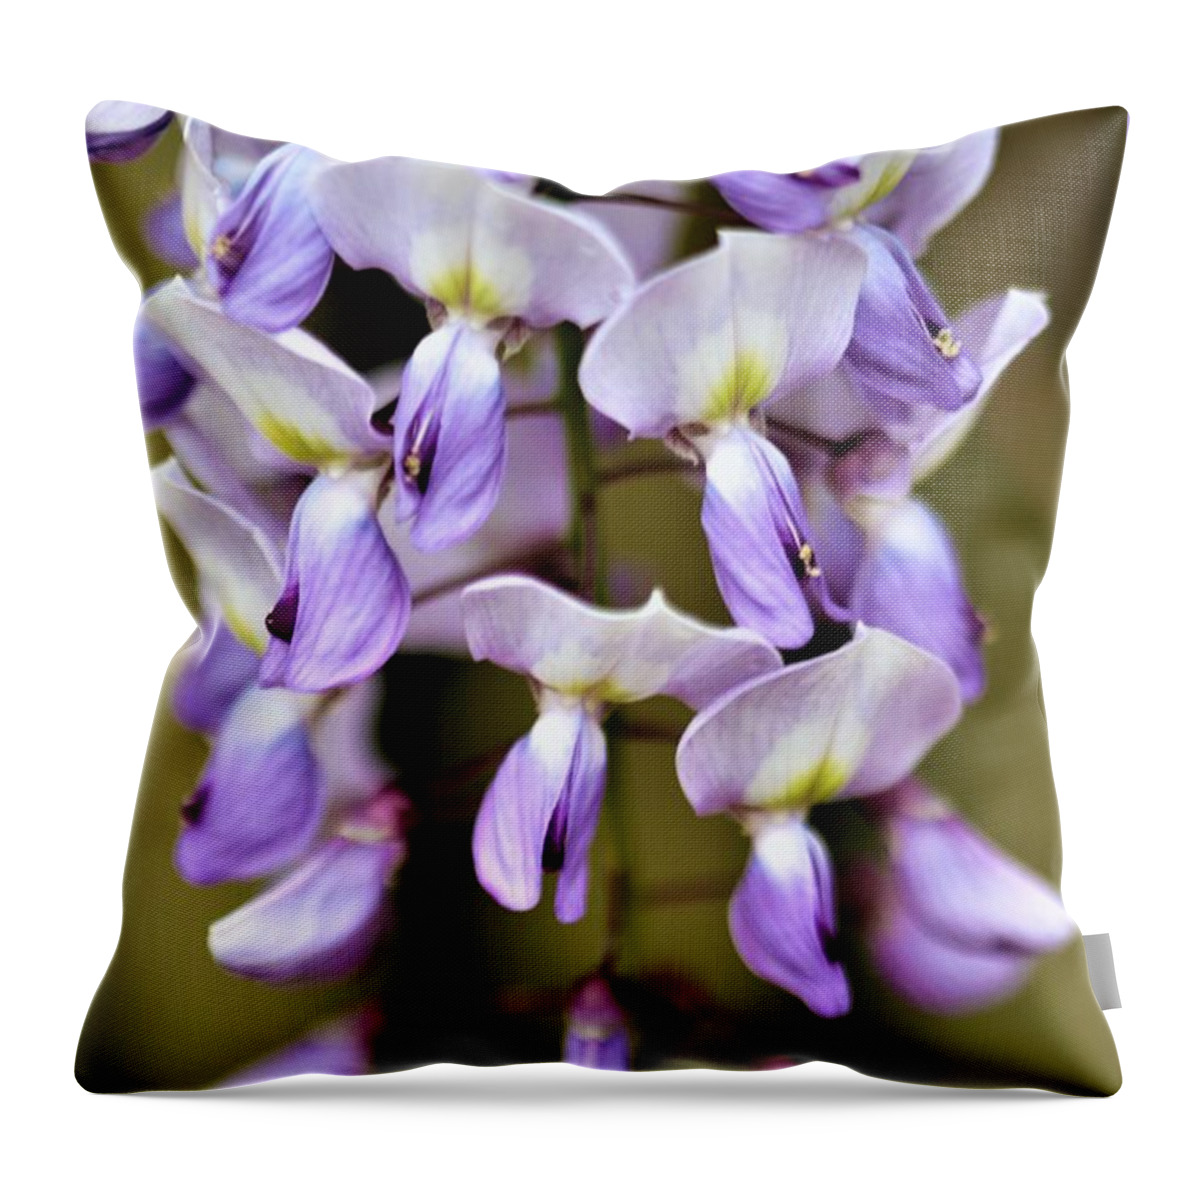 Purple Throw Pillow featuring the photograph Wisteria Whims by Tracey Lee Cassin